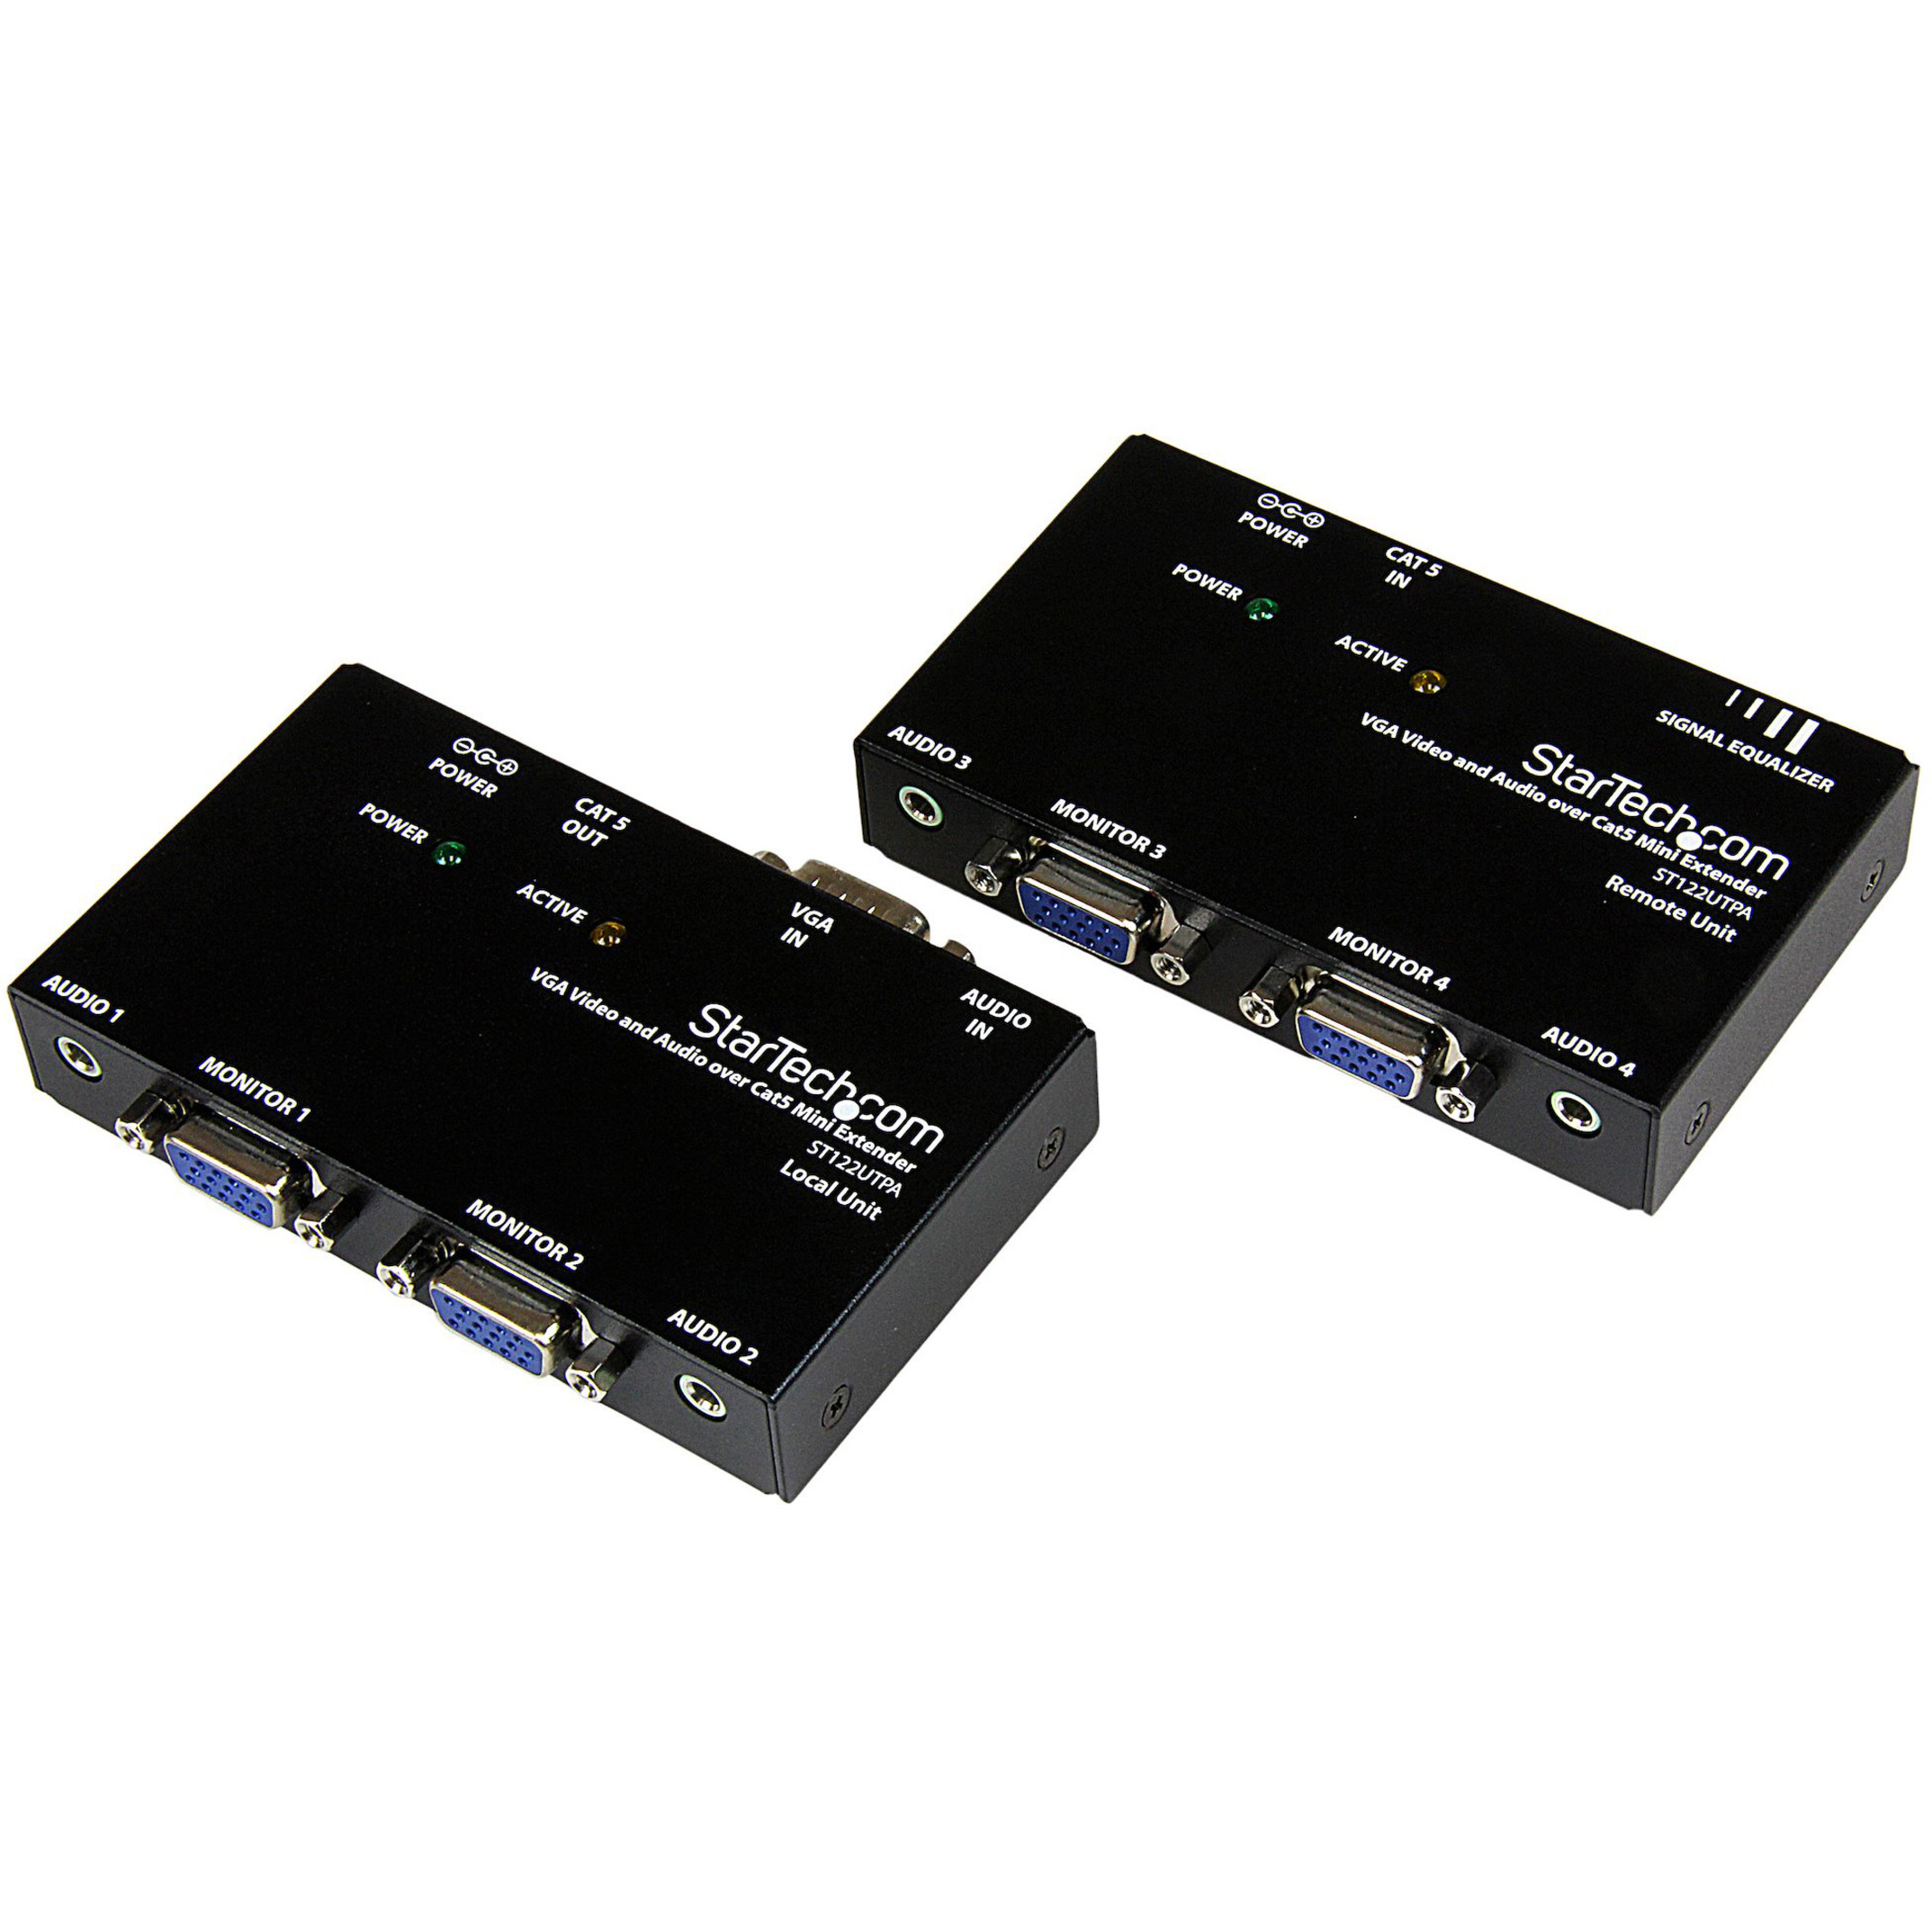 Startech .com .com VGA Video Extender over Cat 5 with AudioExtend and distribute a VGA signal and the accompanying audio to a remote… ST122UTPA